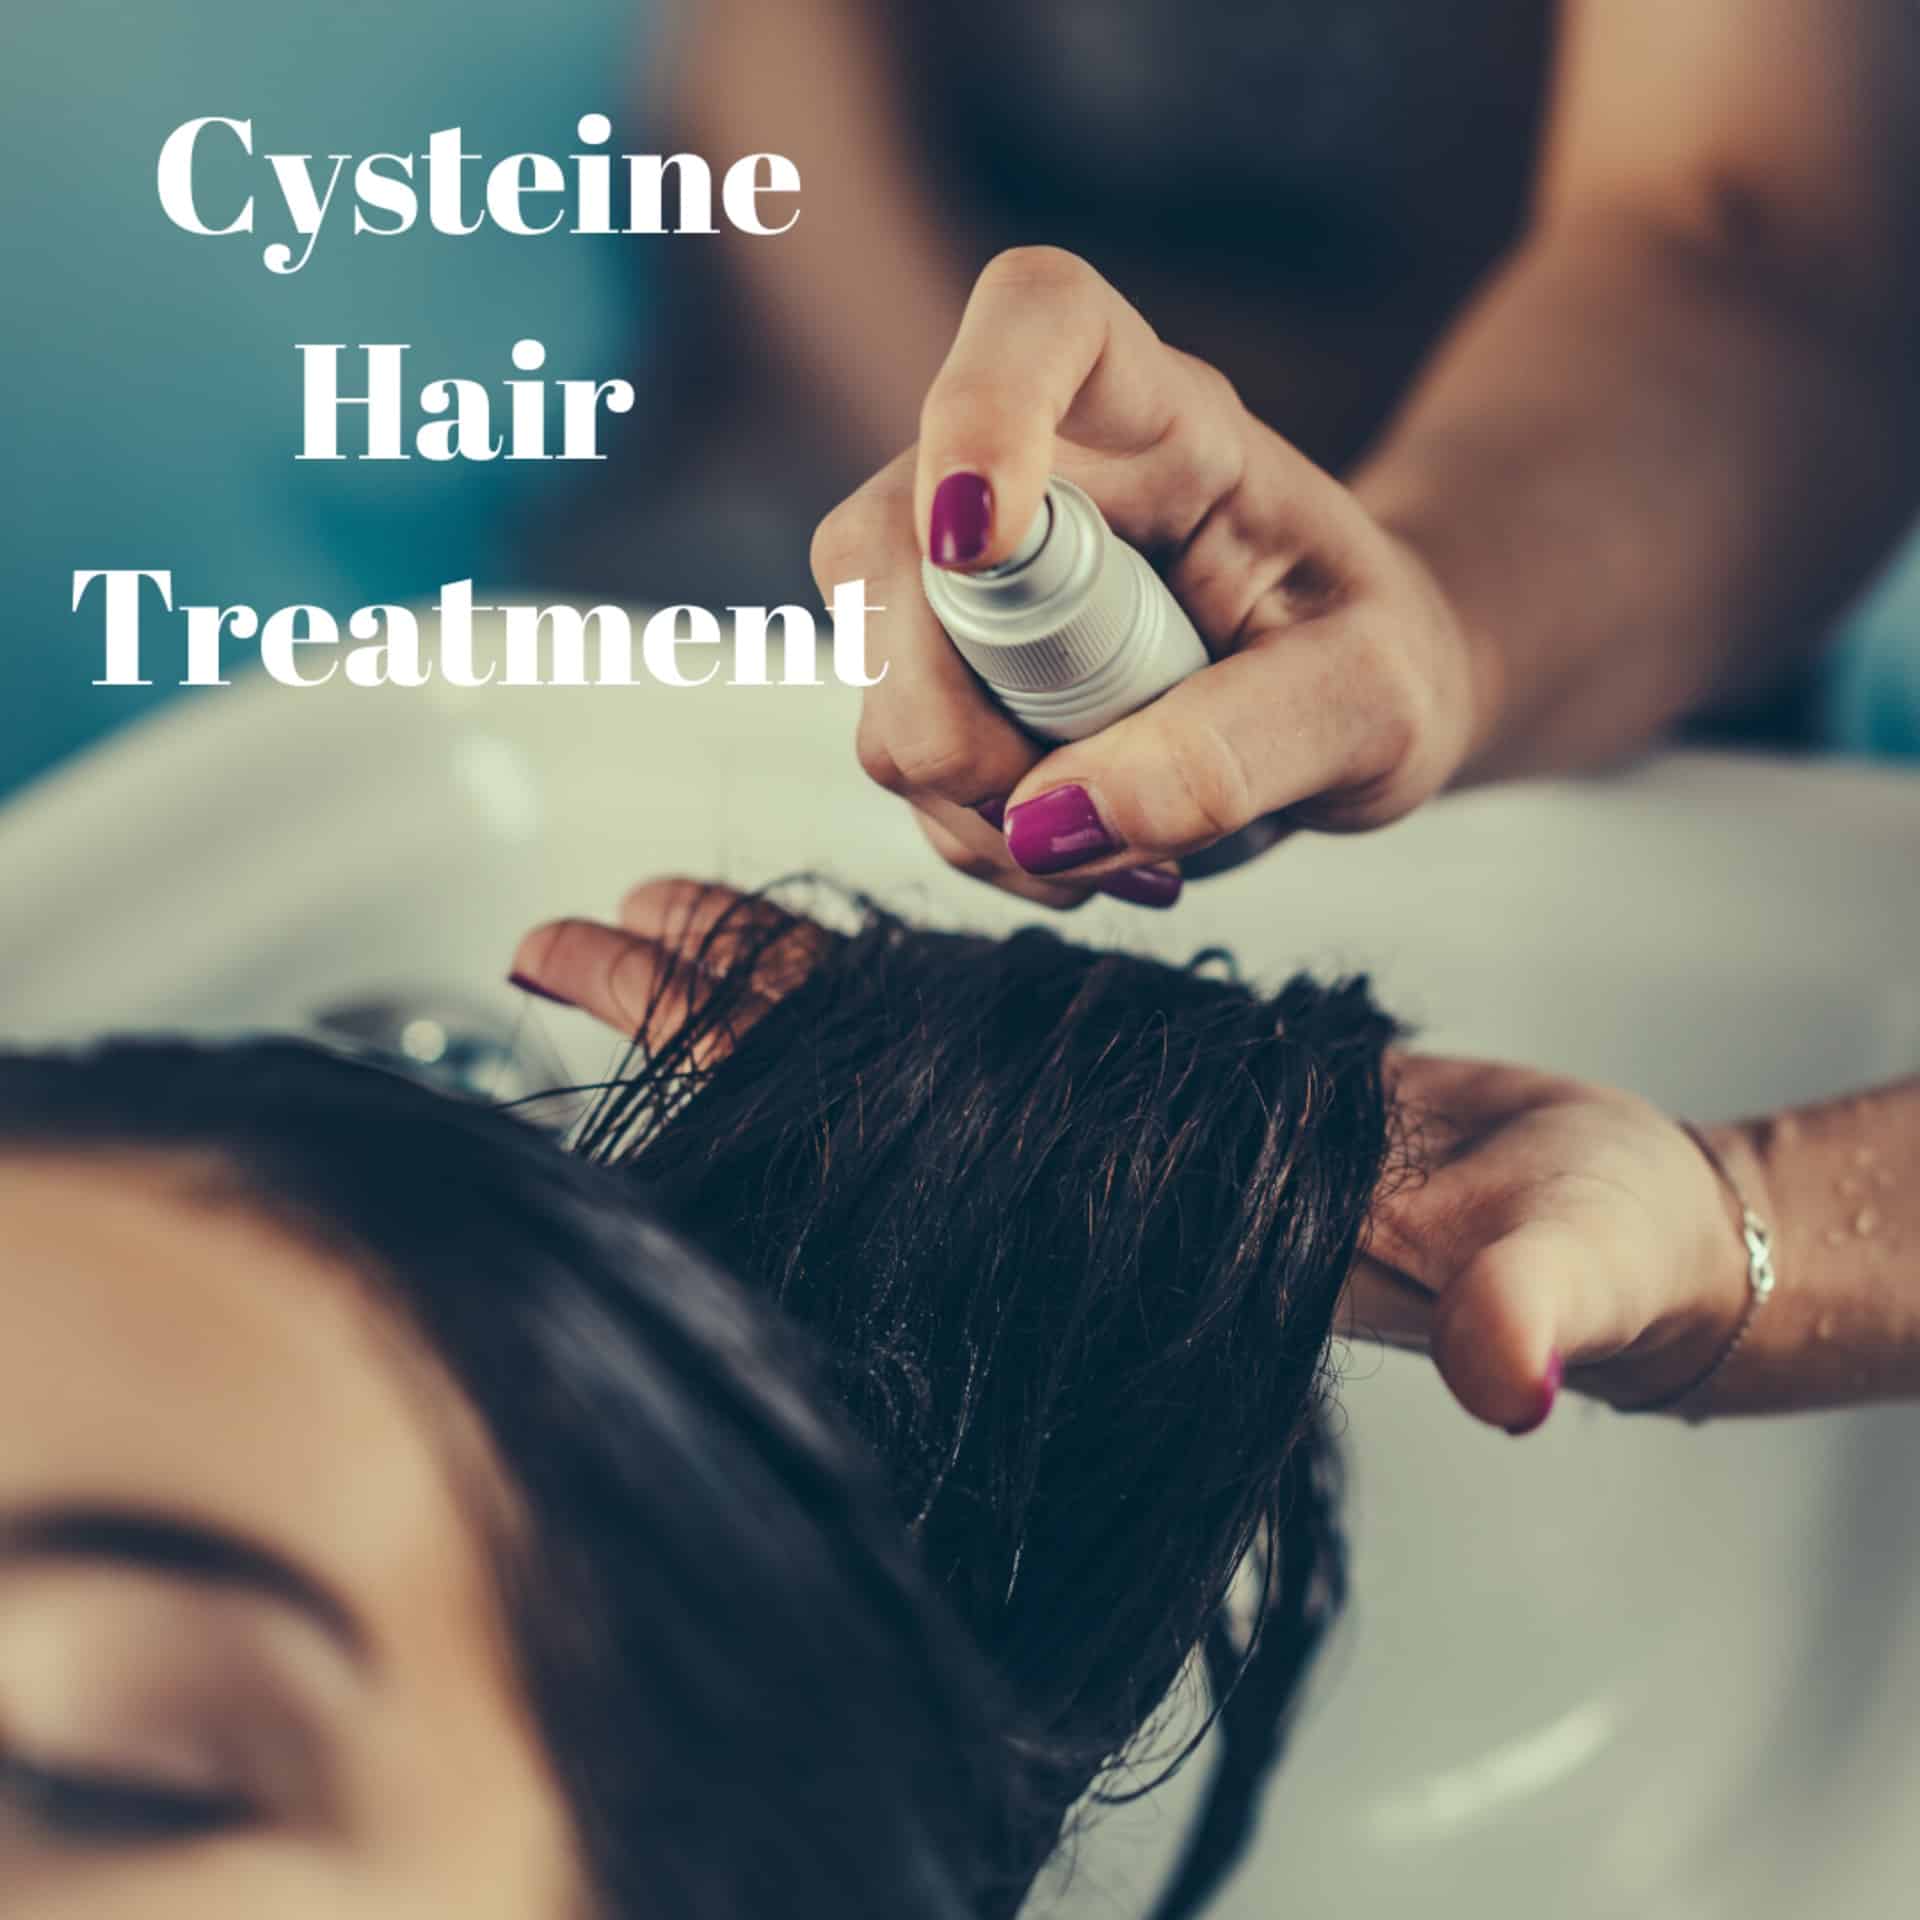 Cysteine Hair Treatment Why Who Should Do It Benefits Pros Cons Faq Showstopper Salon